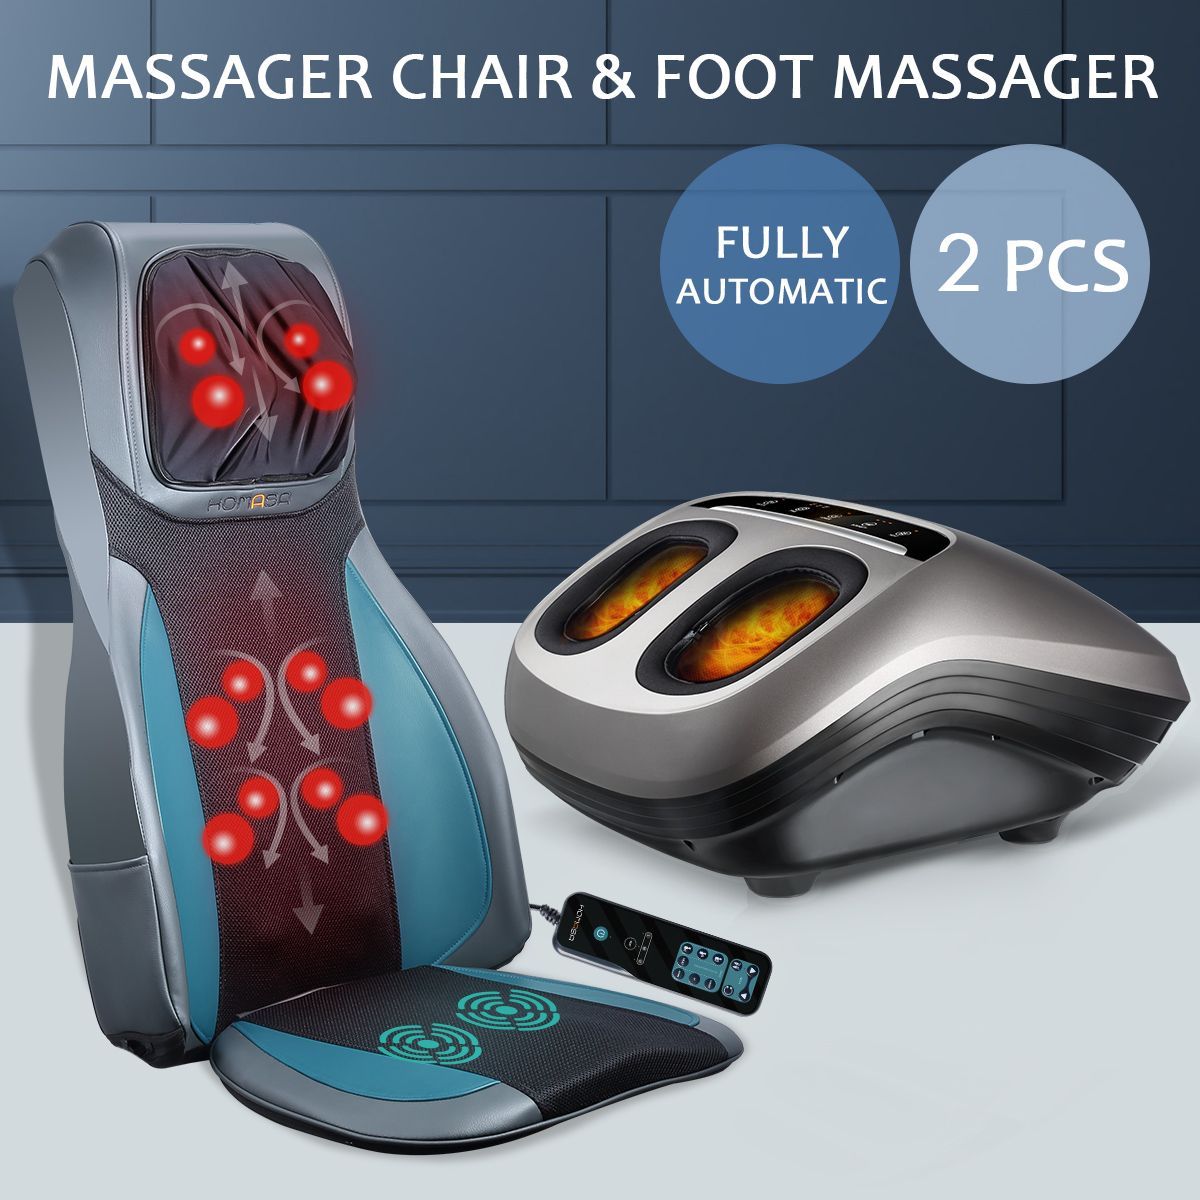 Electric Full Body Massager Massage Chair Cushion Blue And Foot Massager With Heat 2 Pcs 4805